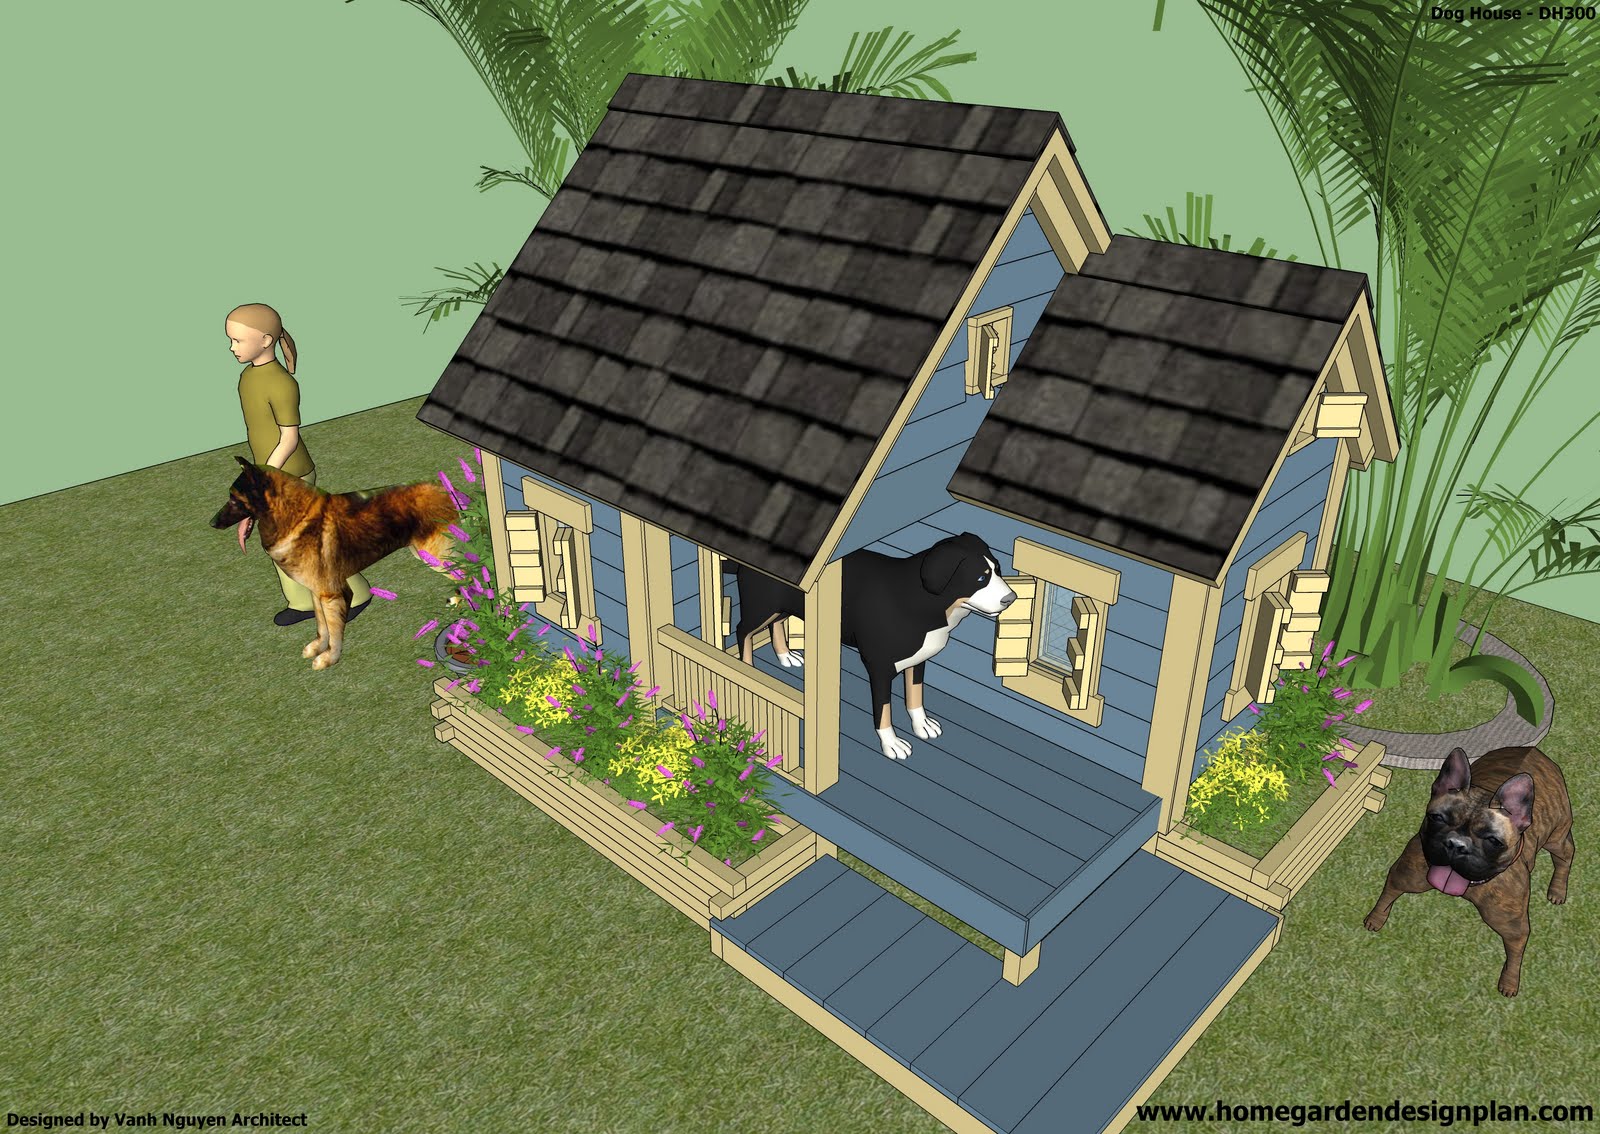 home garden plans: News: DH300 - Dog House Plans Free - How to Build 